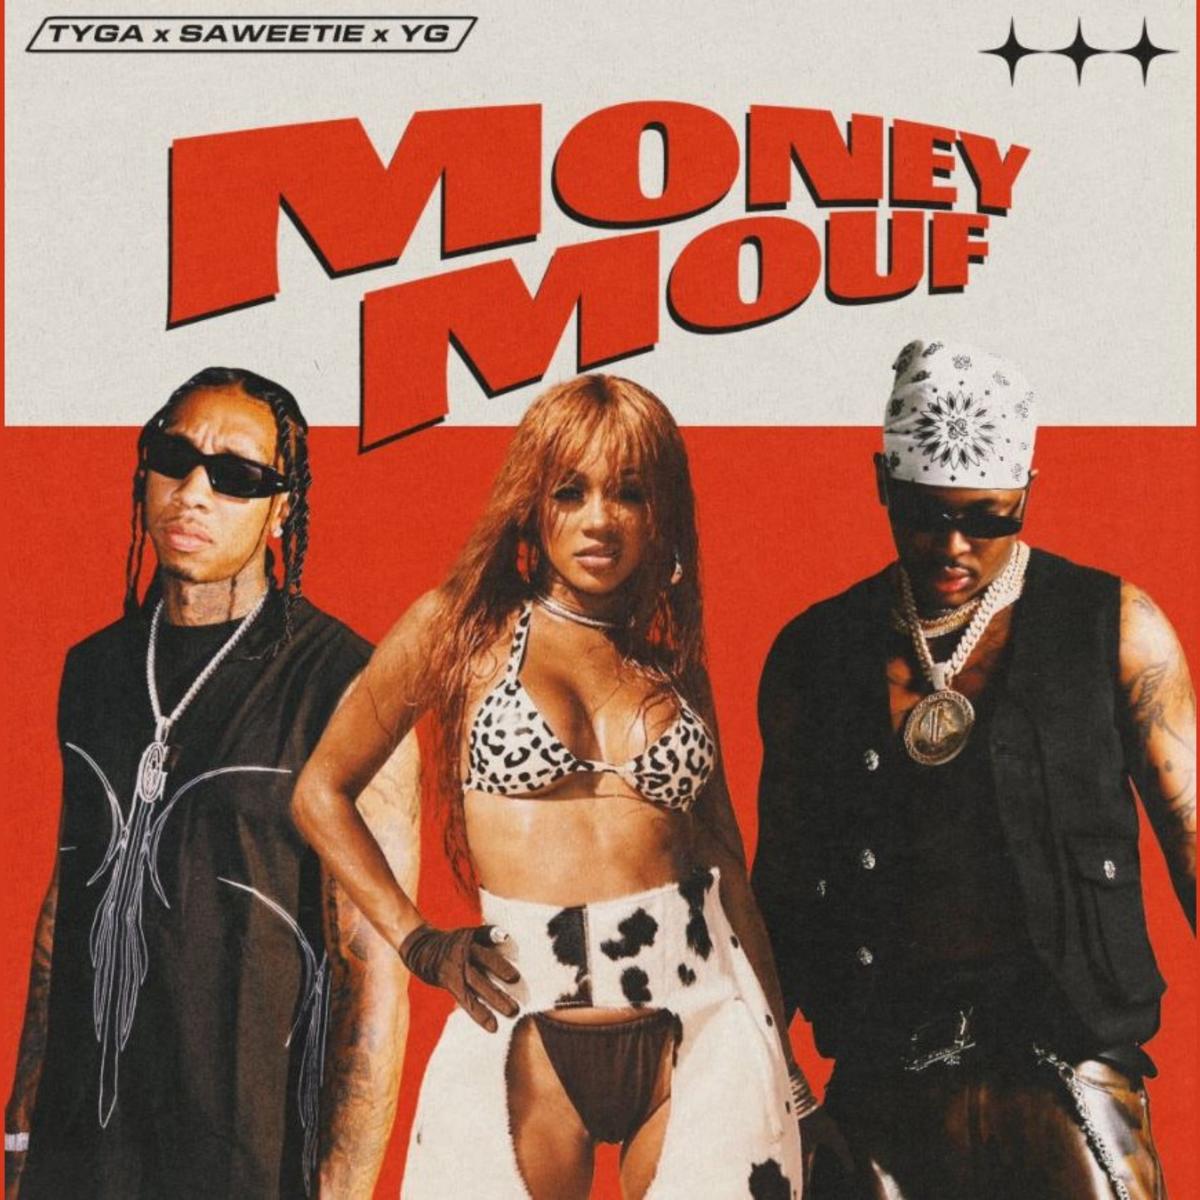 Tyga, Saweetie & YG Link Up For “Money Mouf”